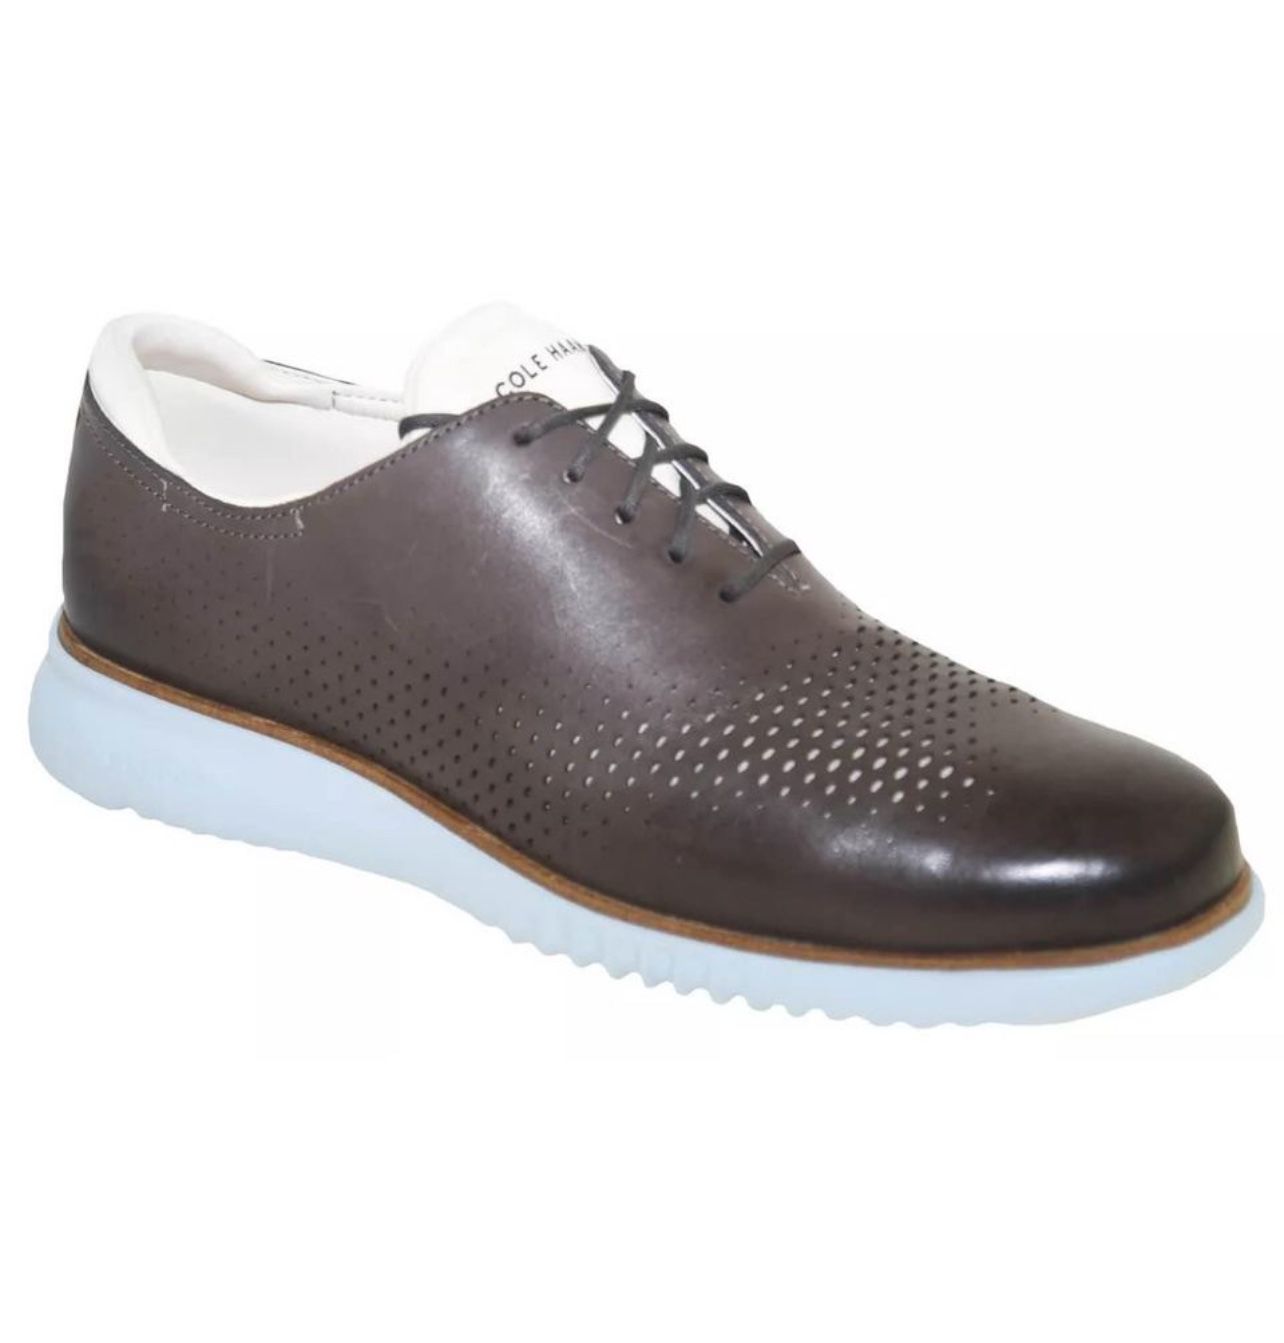 Cole Haan Men's 2.ZERØGRAND Lined Laser Wingtip Oxford Style. Size 9.5W